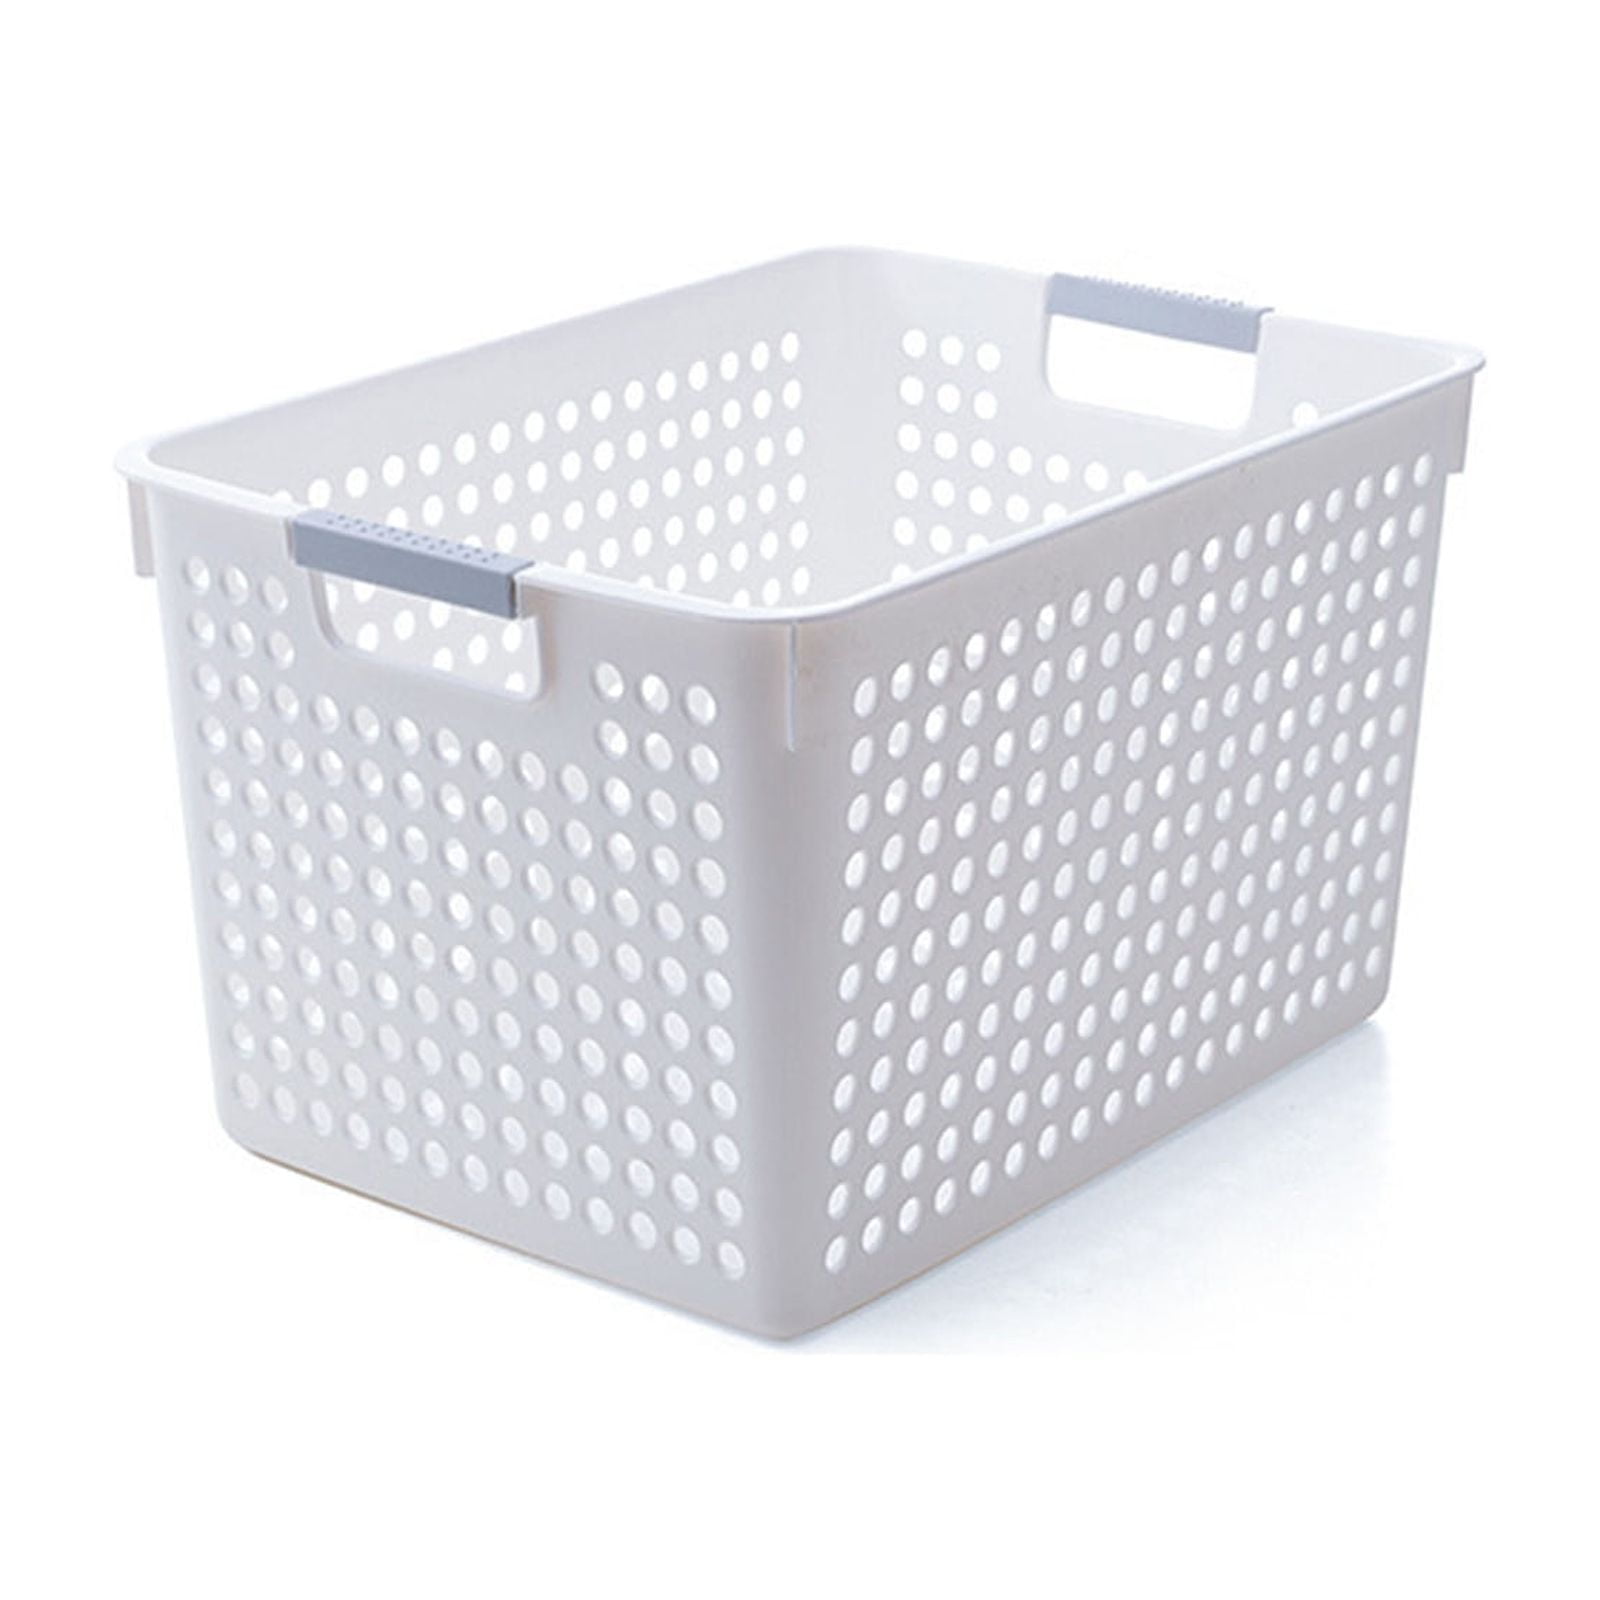 SHENGXINY Dirty Clothes Basket Clearance Plastic Laundry Basket,With ...